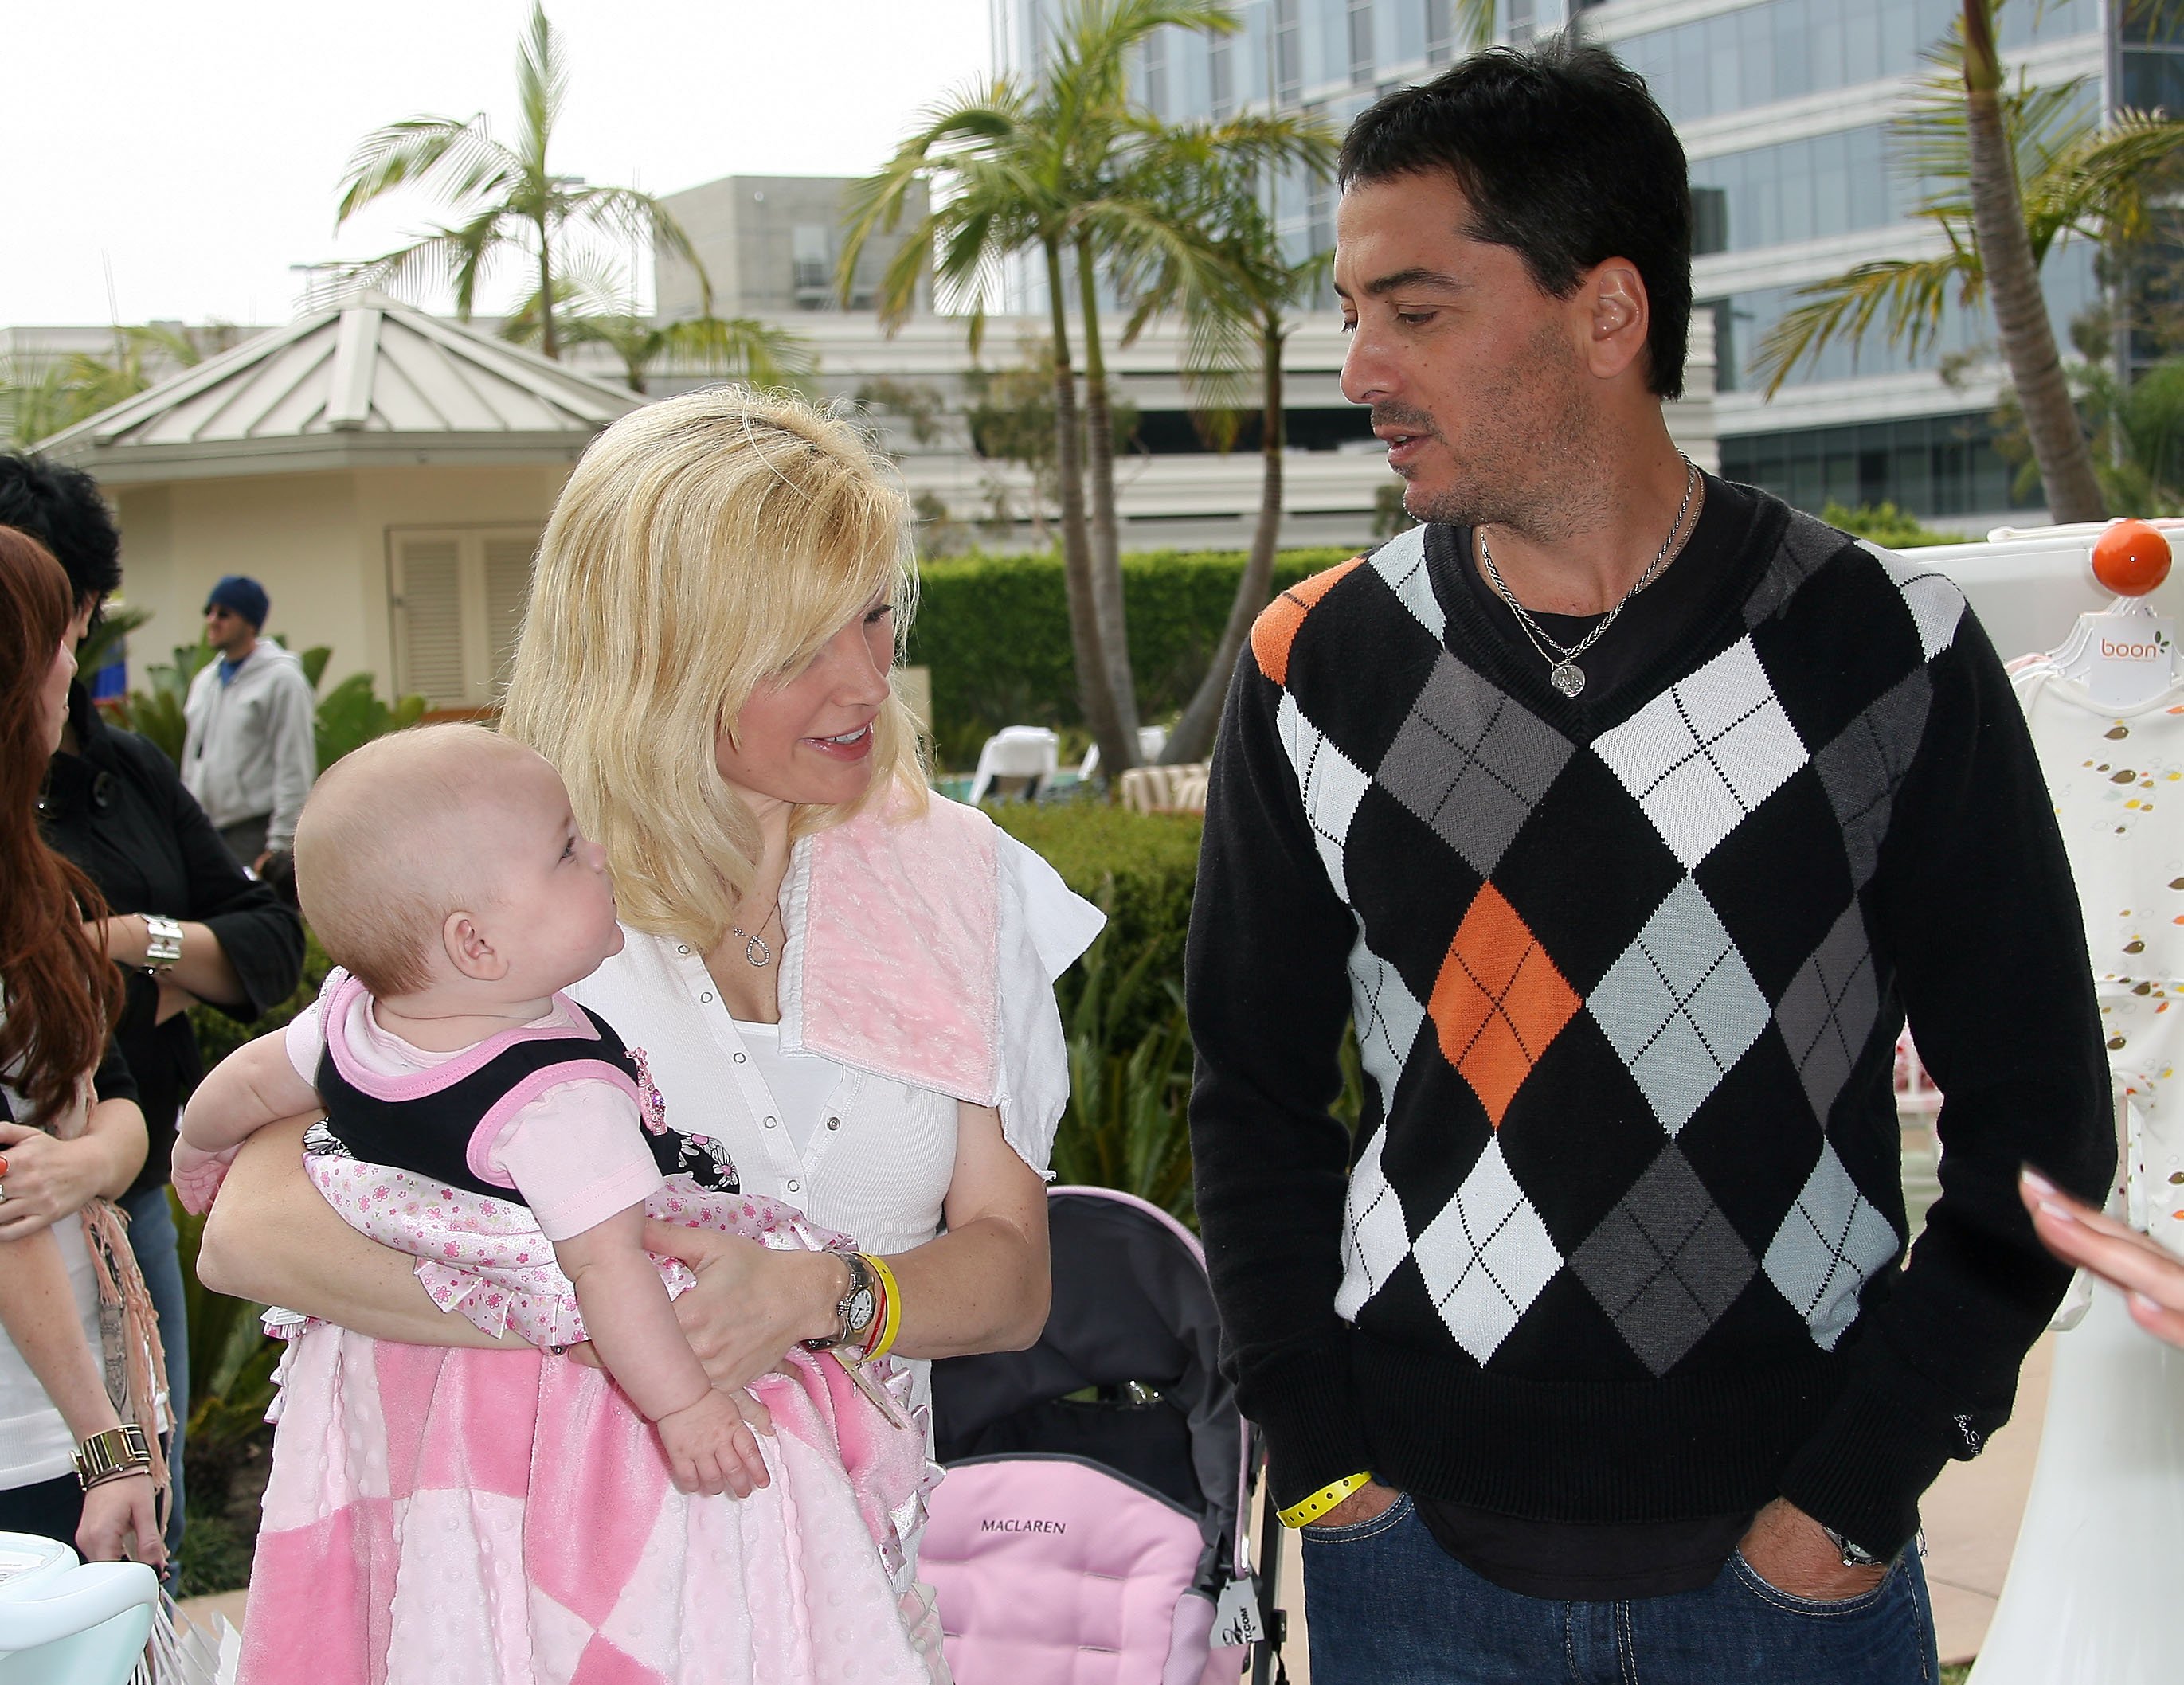 Scott Baio with wife Renee Sloan and their baby daughter Bailey during The Silver Spoon Hollywood Dog and Baby Buffet at the Hyatt Century City Hotel on May 9, 2008 in Los Angeles, California. / Source: Getty Images